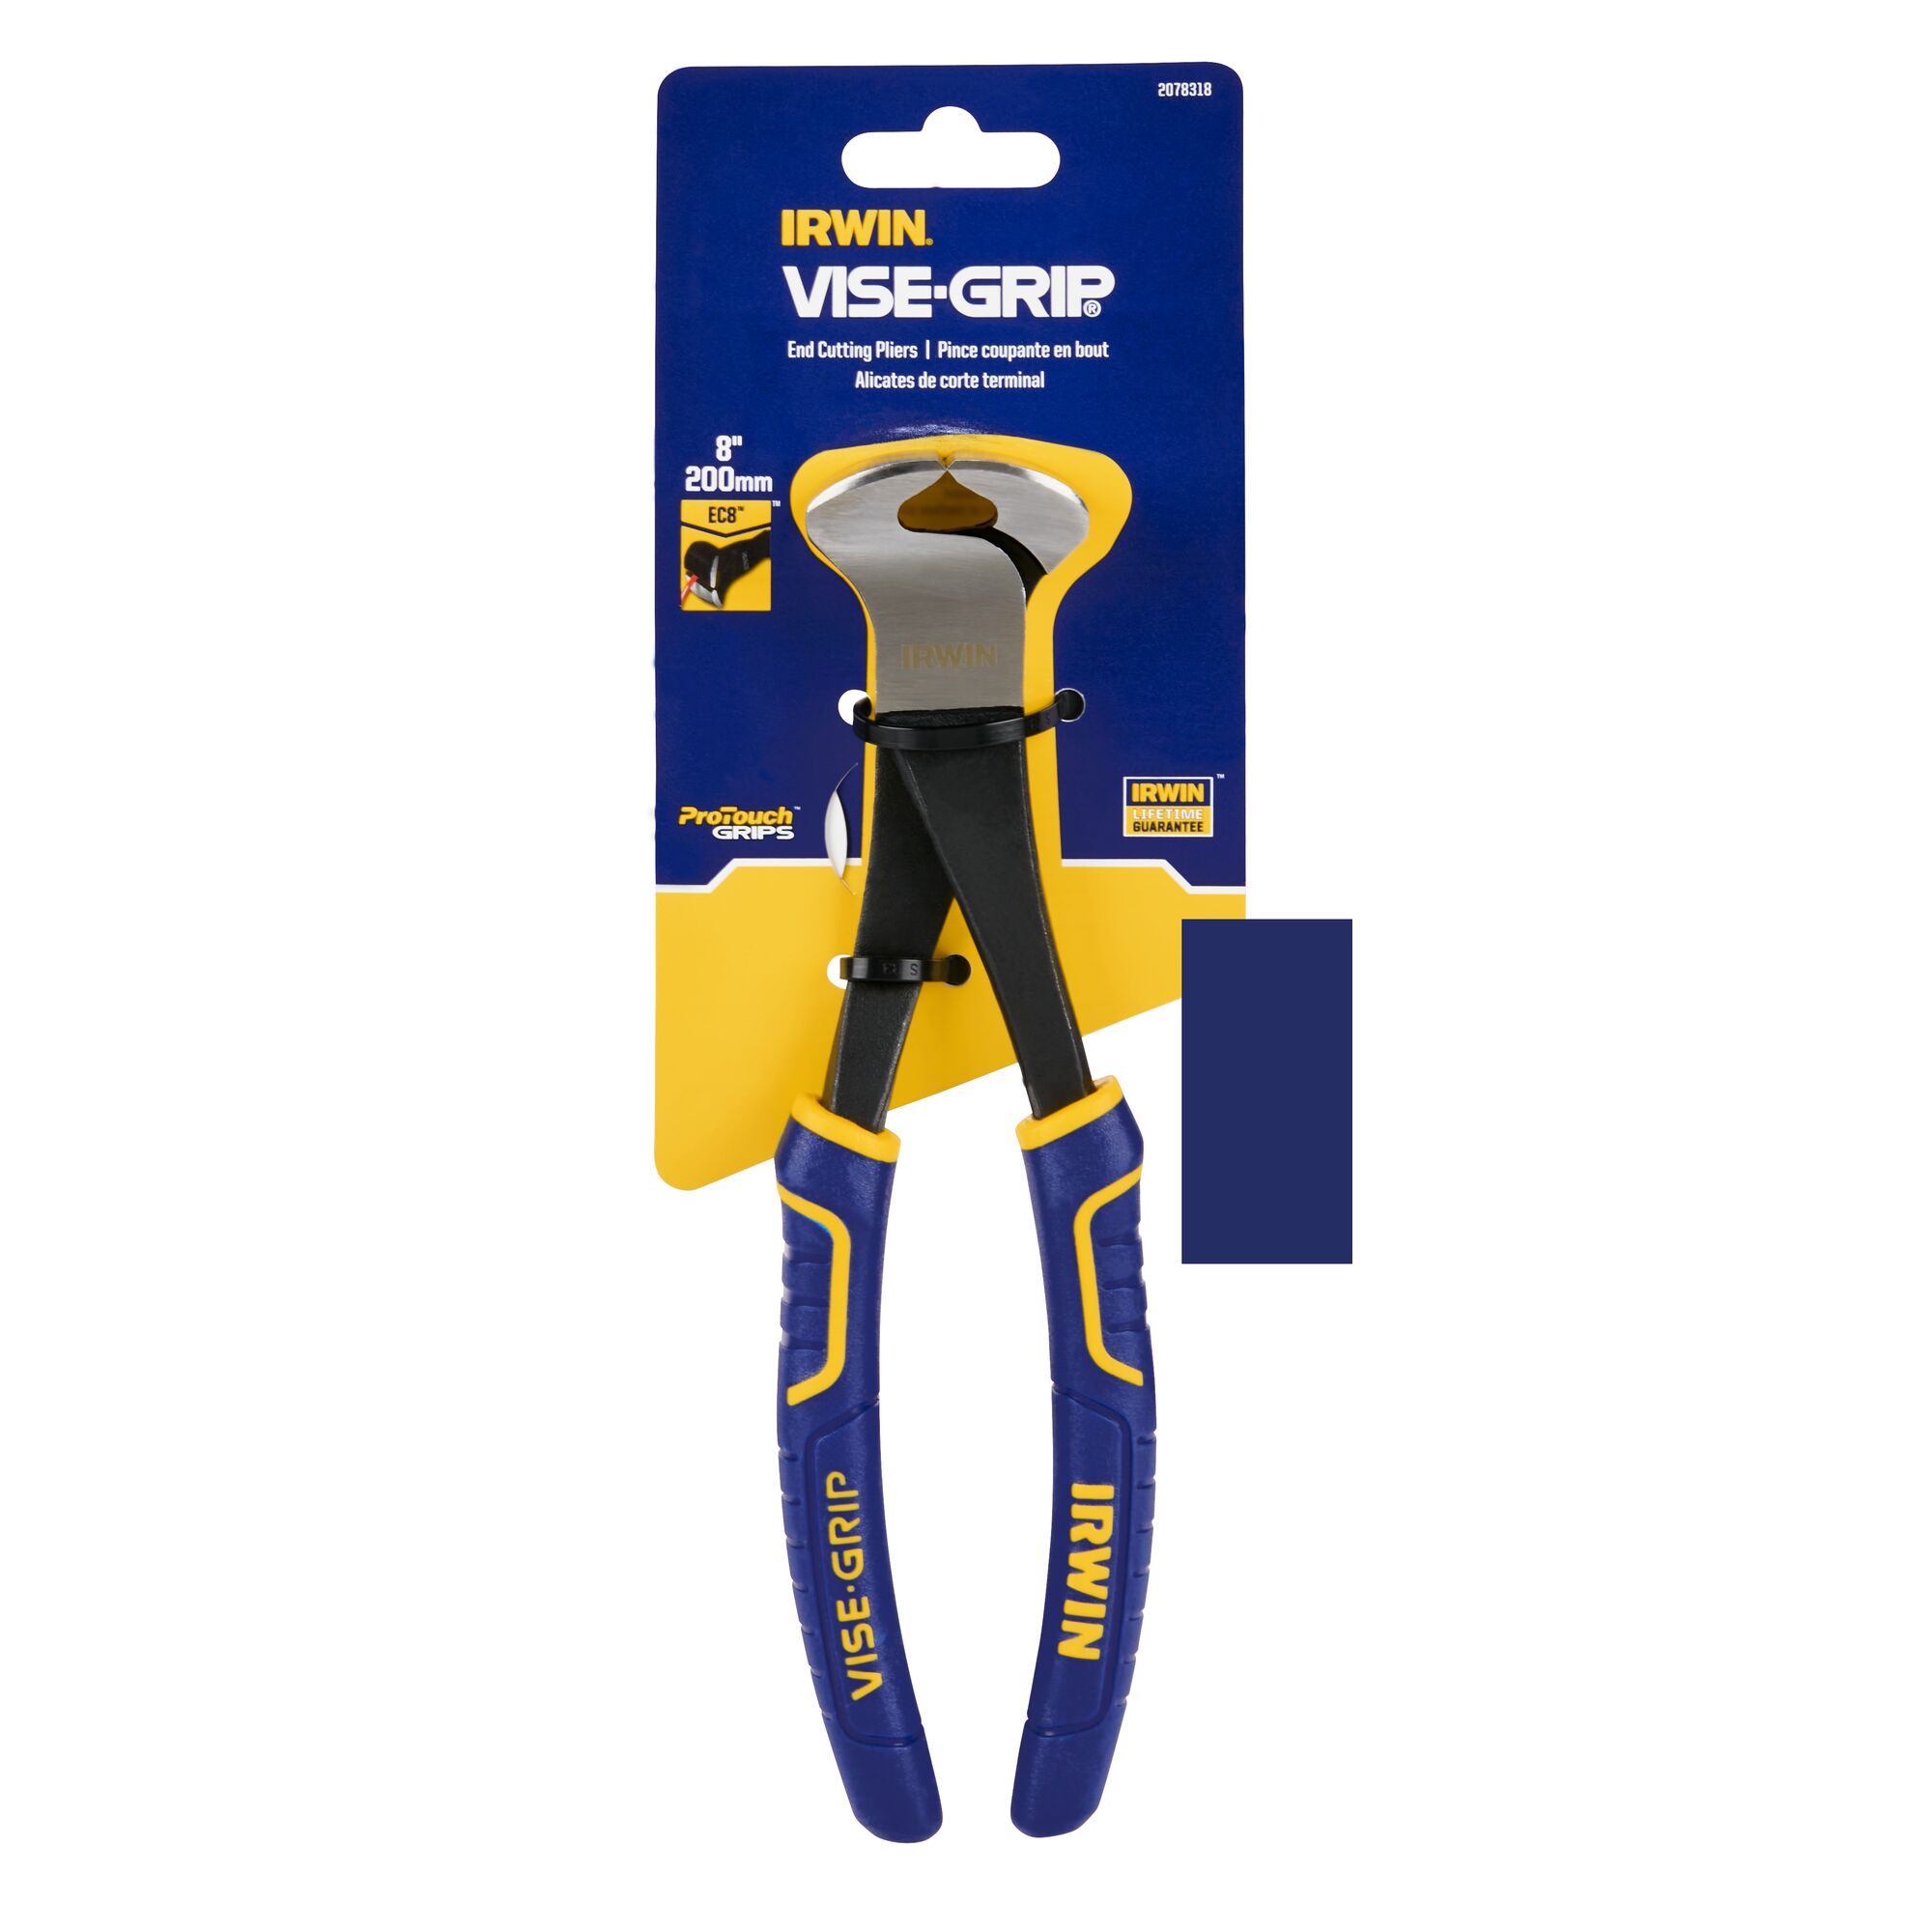 IRWIN VISE-GRIP 8-in Construction End Cutting Pliers in the